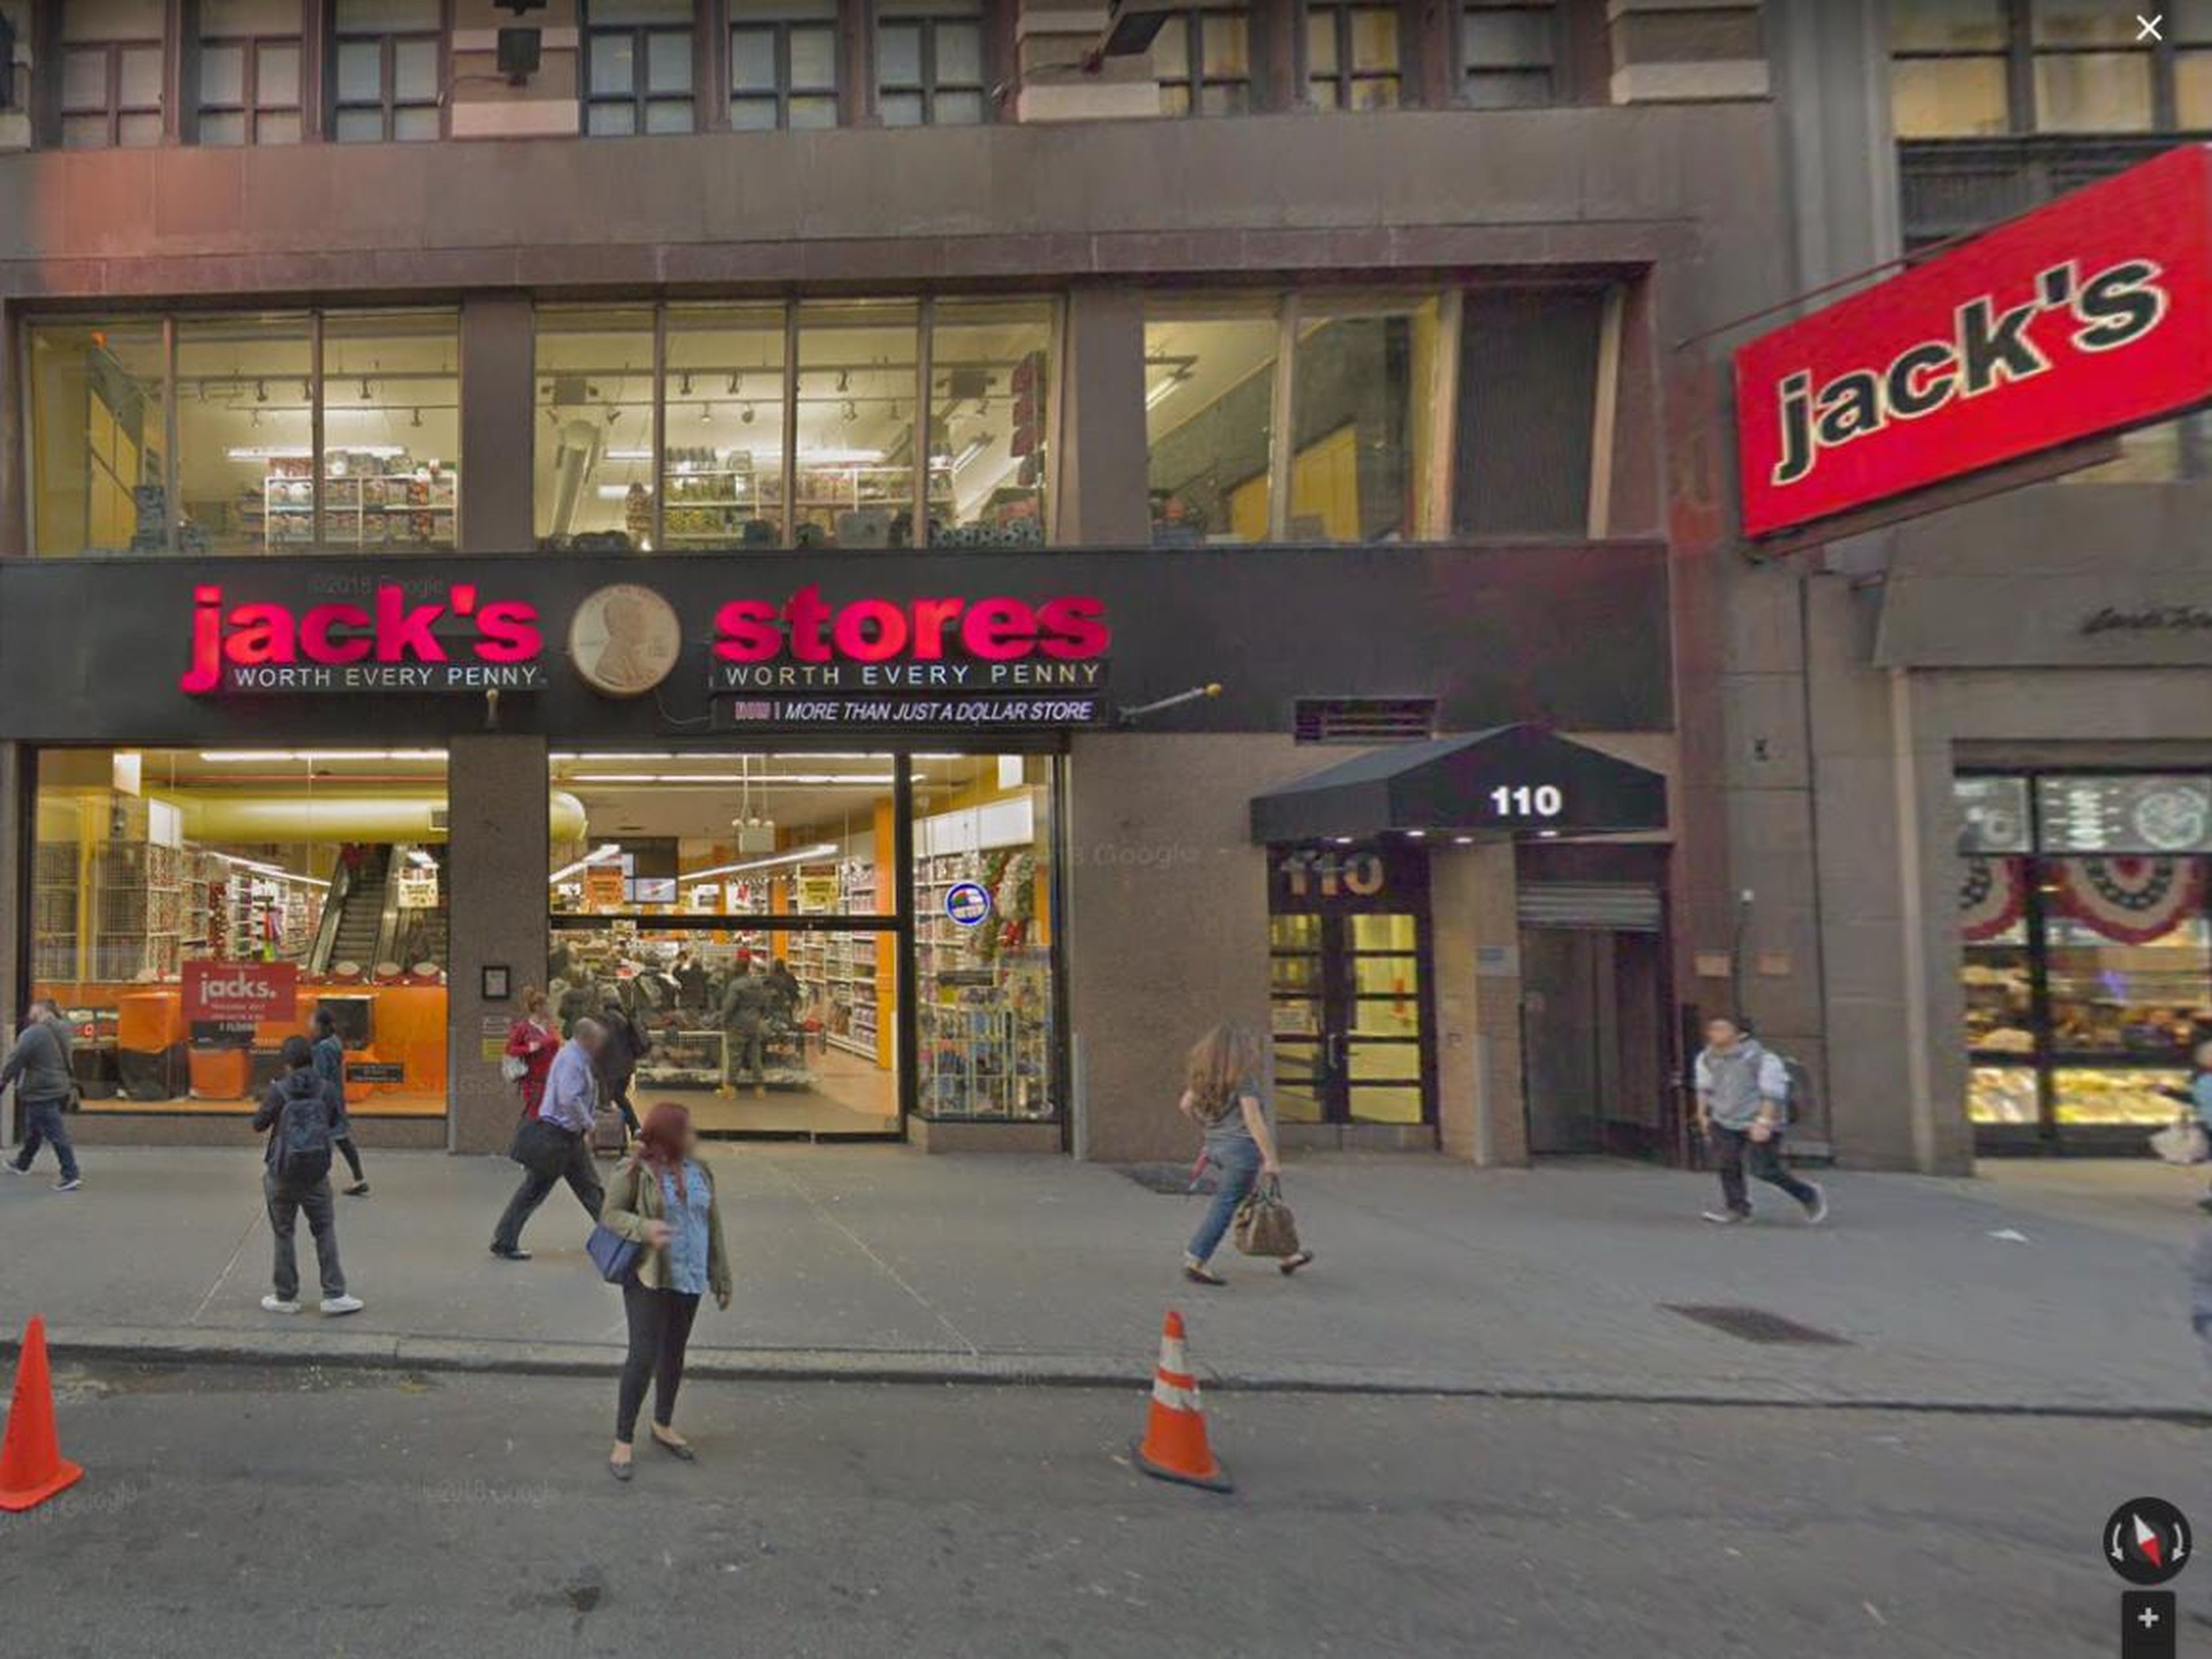 From there, they headed to Jack's, a discount grocery chain a few blocks from Penn Station.